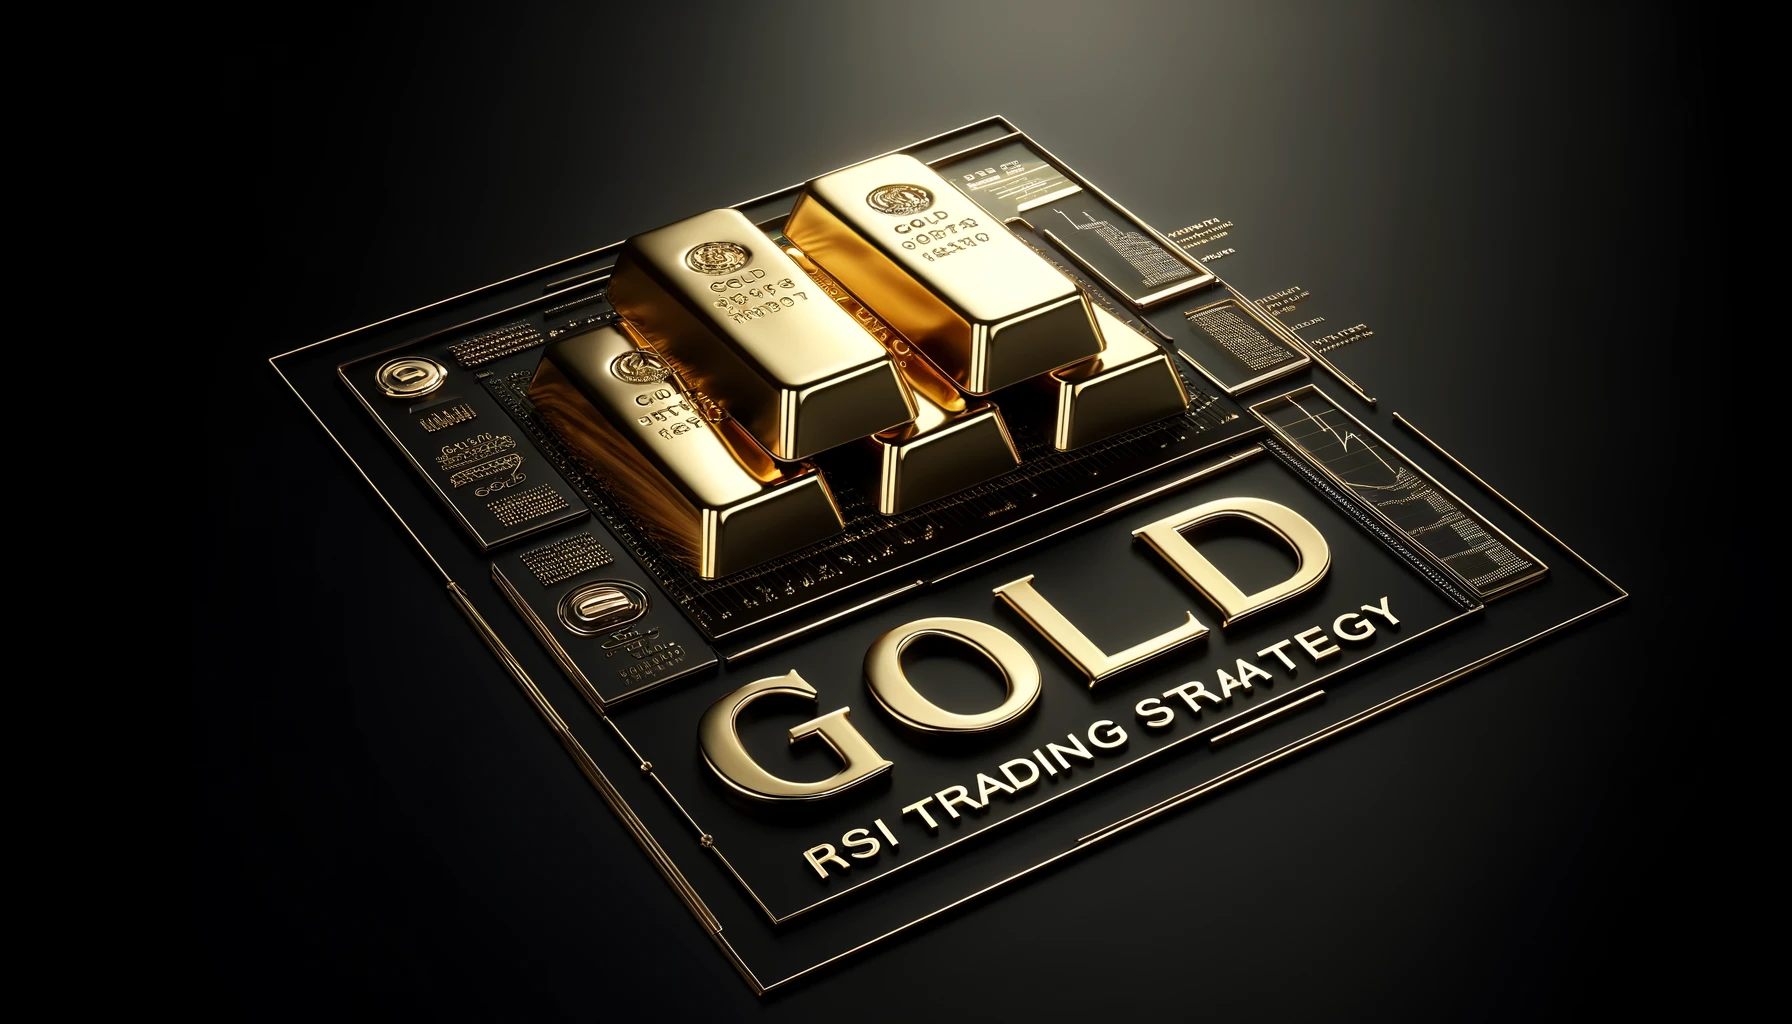 Gold trading strategy